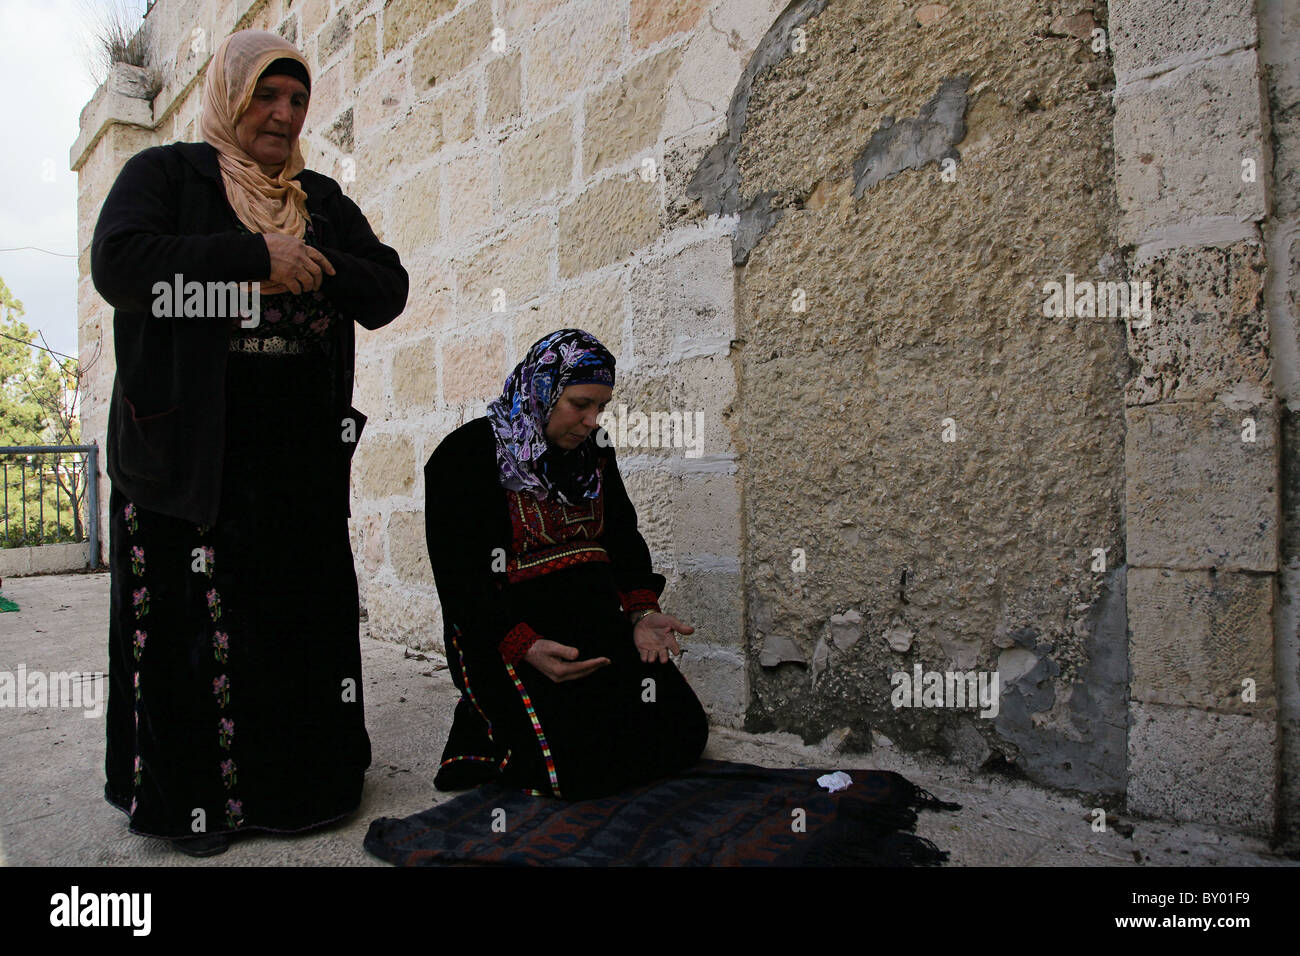 Palestinian women praying as they revisits their family's village in Ein Karem or Ain Kerem a neighborhood in southwest Jerusalem which was depopulated by Arab inhabitants and repopulated by Jewish immigrants during the 1948 Arab-Israeli War. Israel Stock Photo